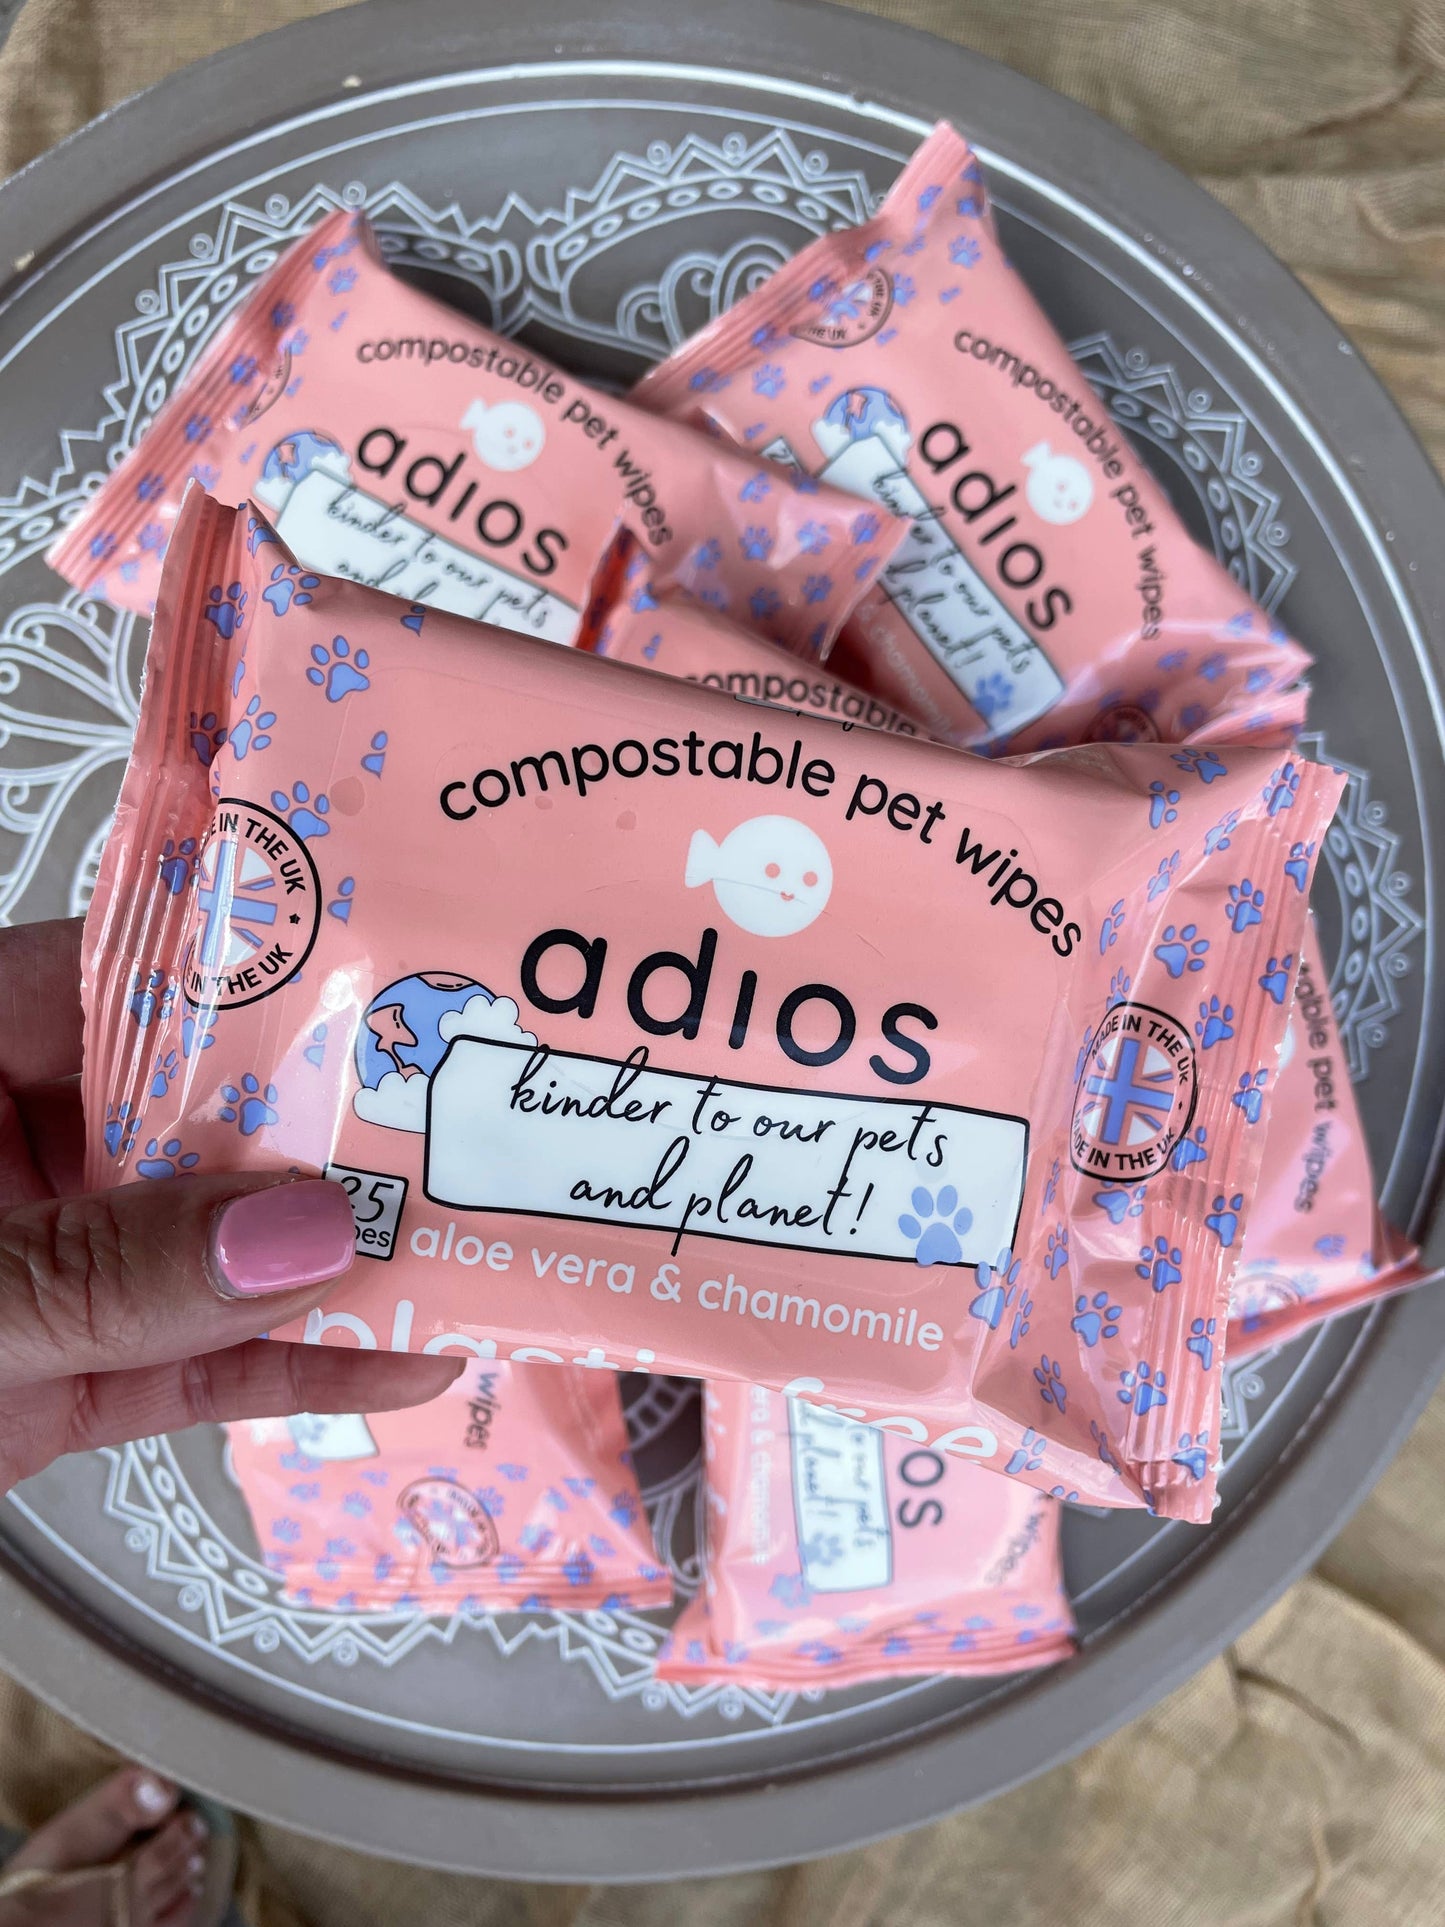 Adios Plastic Compostable Pet Wipes (25 wipes) - Dog Grooming Wipes | Dog Walking Wipes